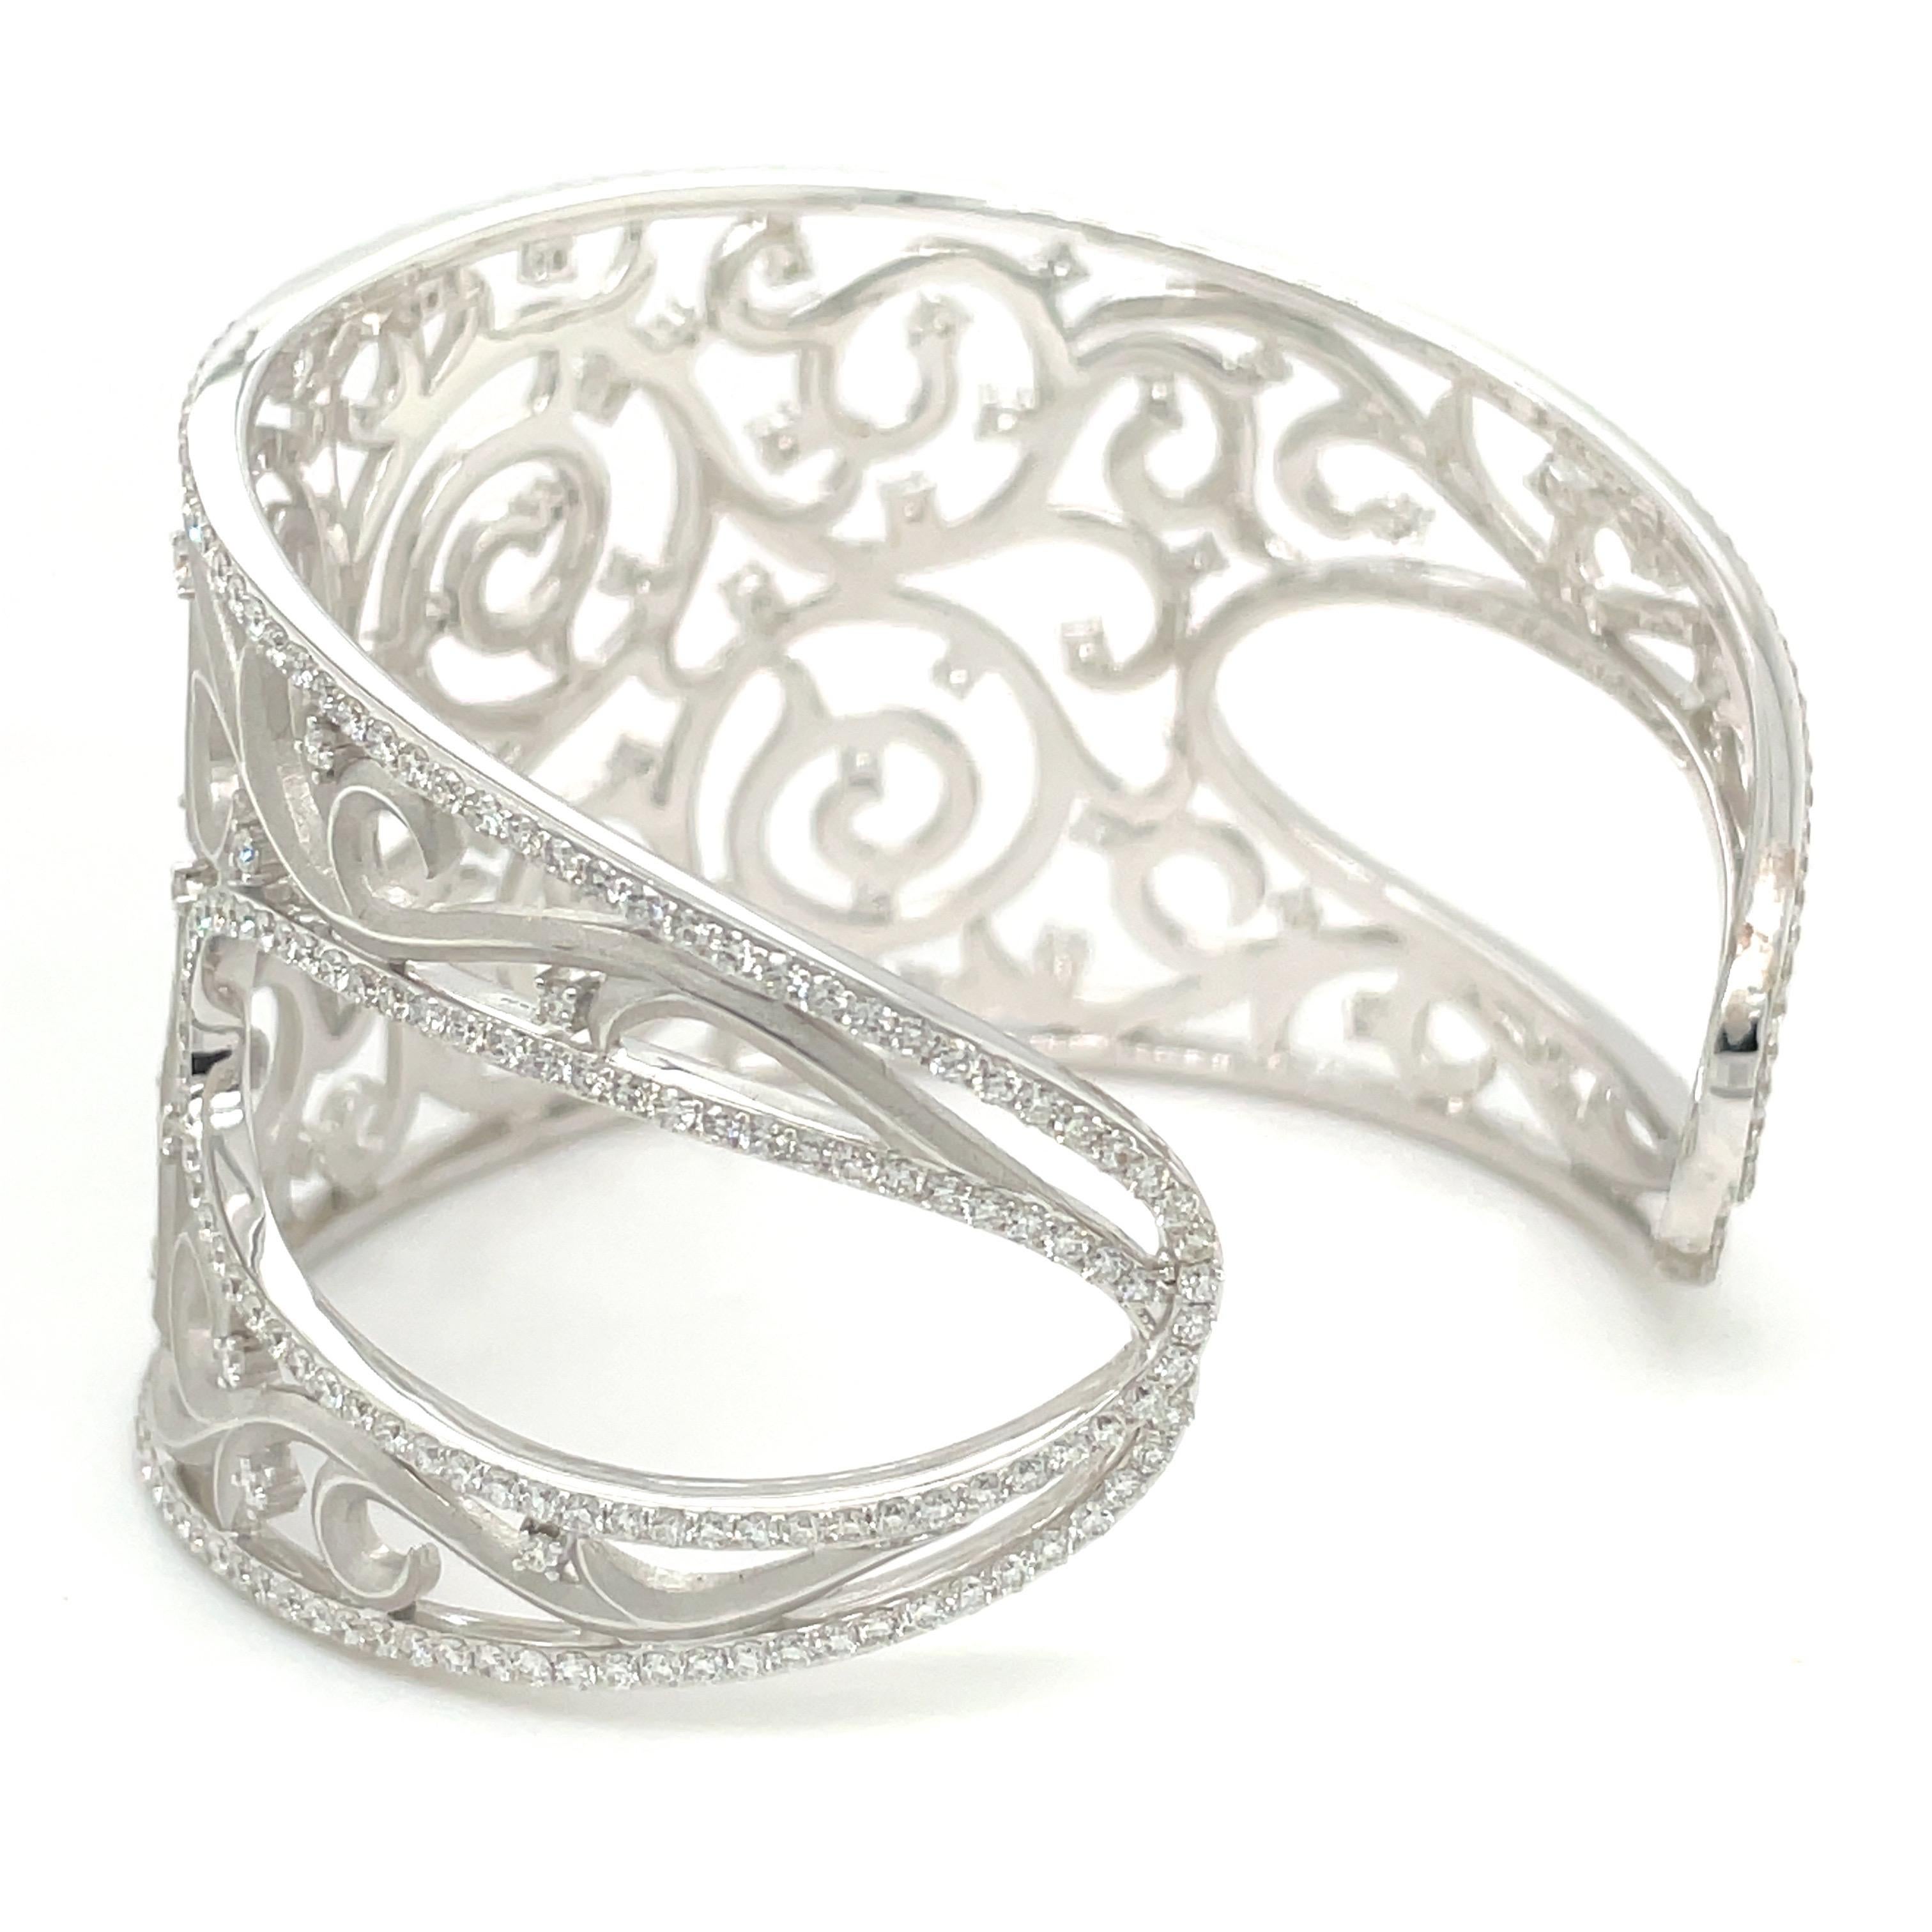 Cellini 18kt White Gold and Diamond 4.90Ct. Lace Cuff Bracelet For Sale 3